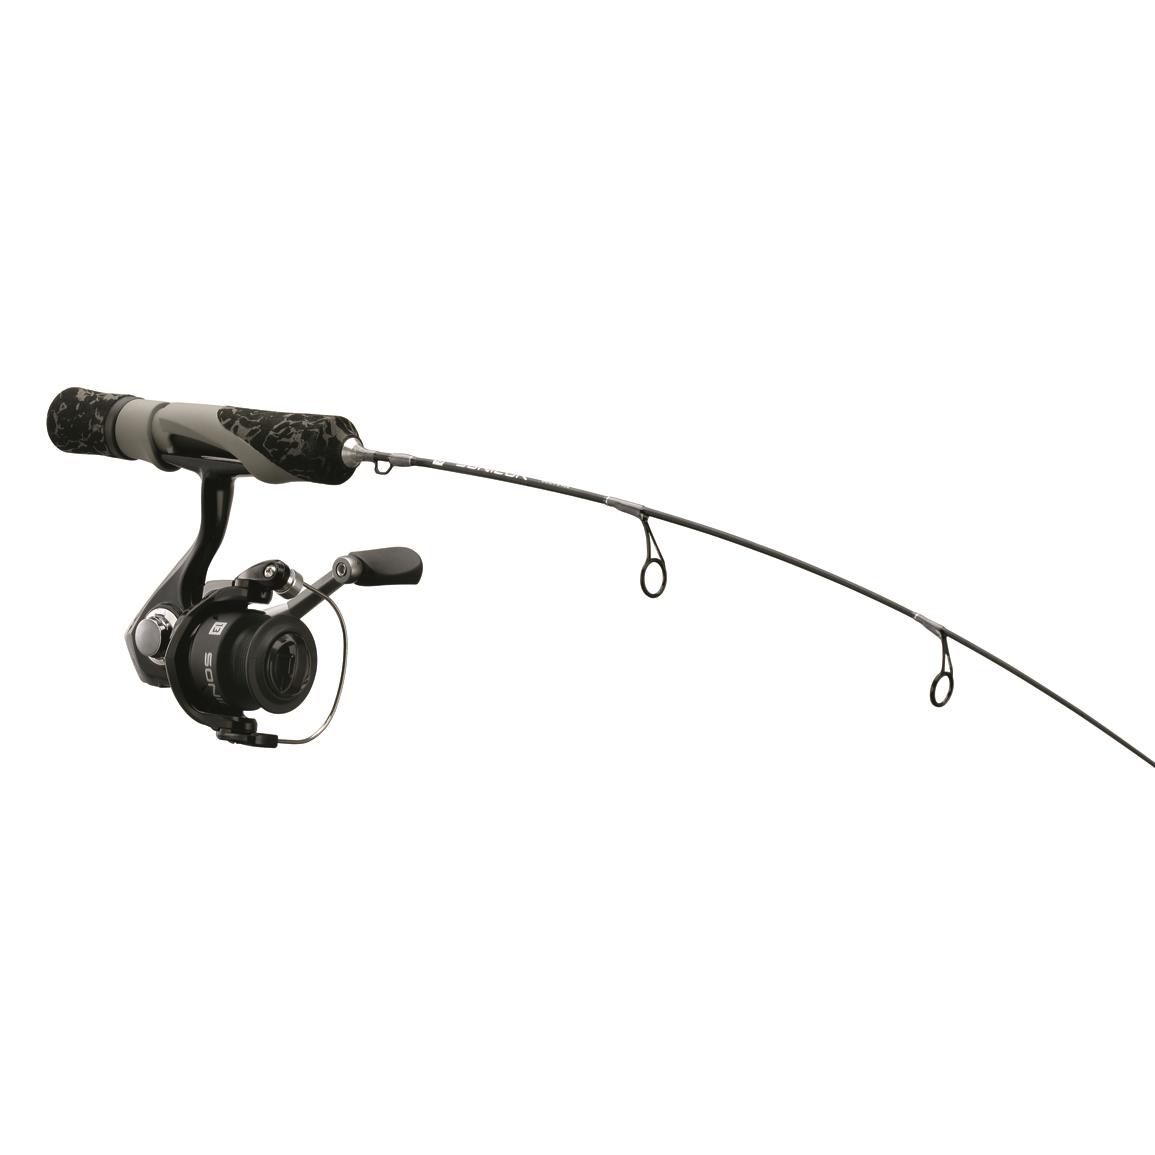 Pflueger Trion Fenwick HMG Ice Fishing Spinning Combo, 28 Length, Medium  Heavy Power - 724158, Ice Fishing Combos at Sportsman's Guide